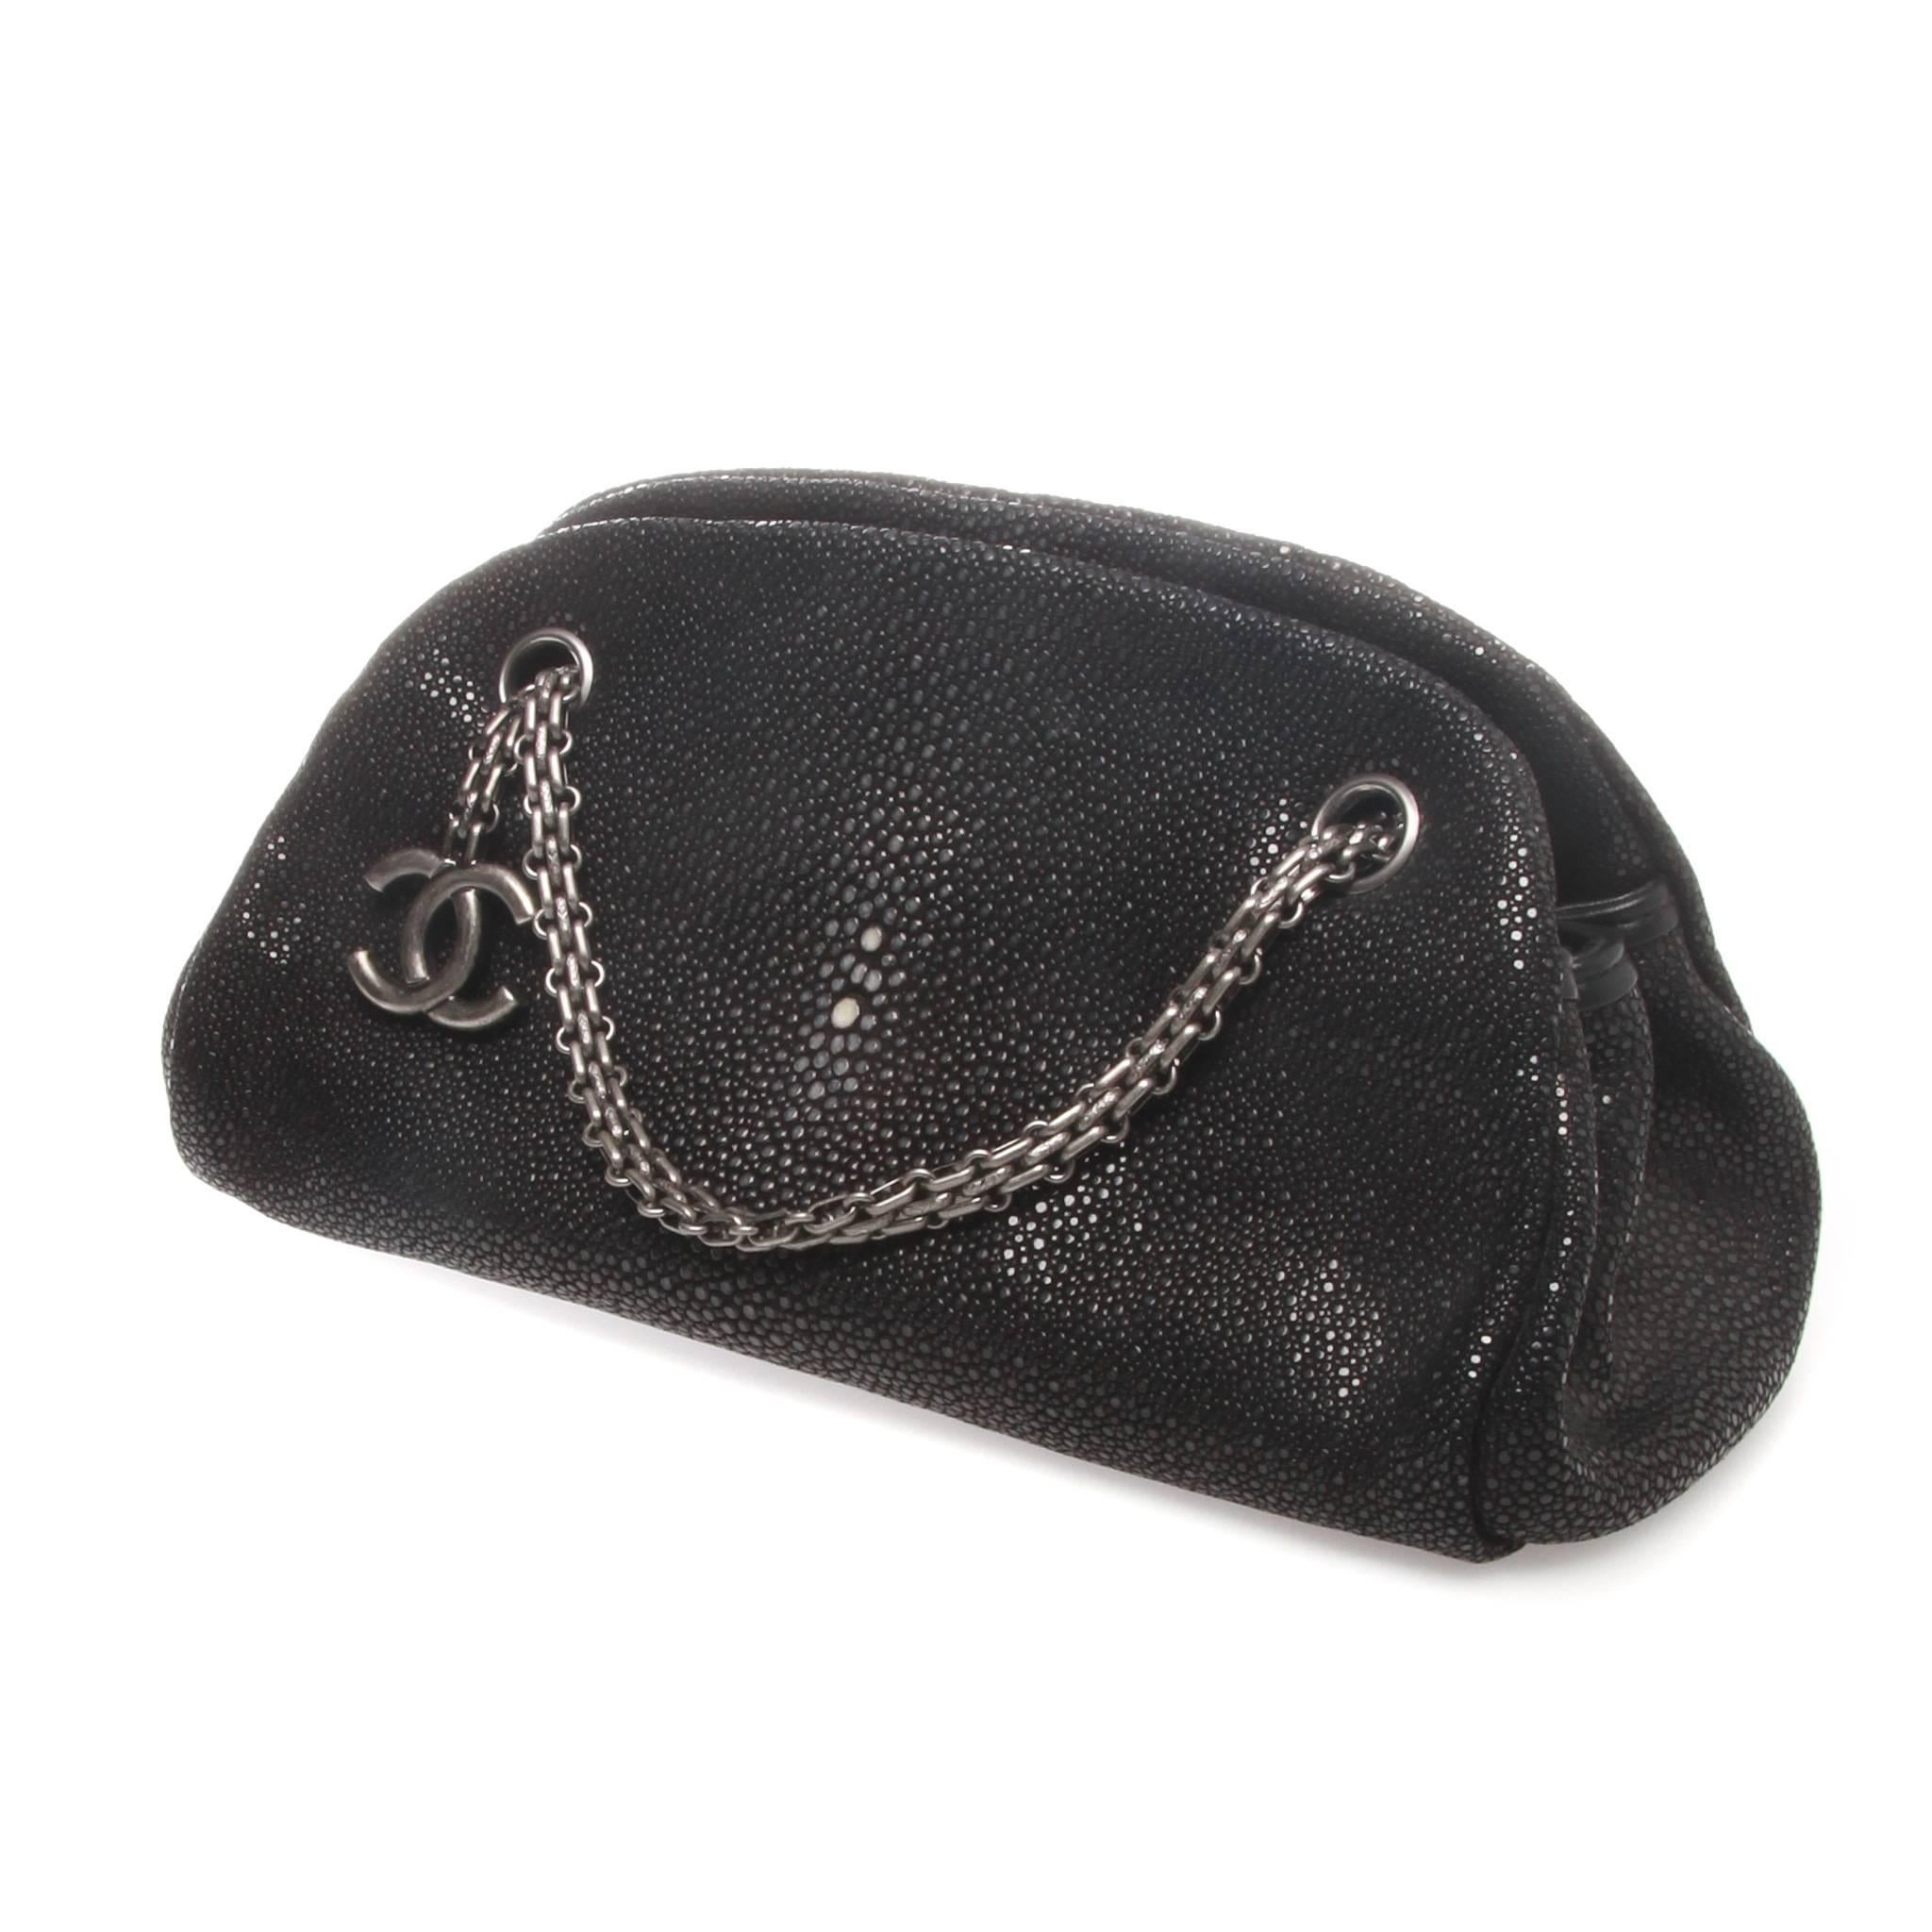 A stunning-rare black stingray half moon tote from CHANEL.
It features an open top design, a chain shoulder strap, a logo charm, an internal zipped pocket, an internal logo stamp and multiple interior compartments. 
Fabulous black stingray half moon